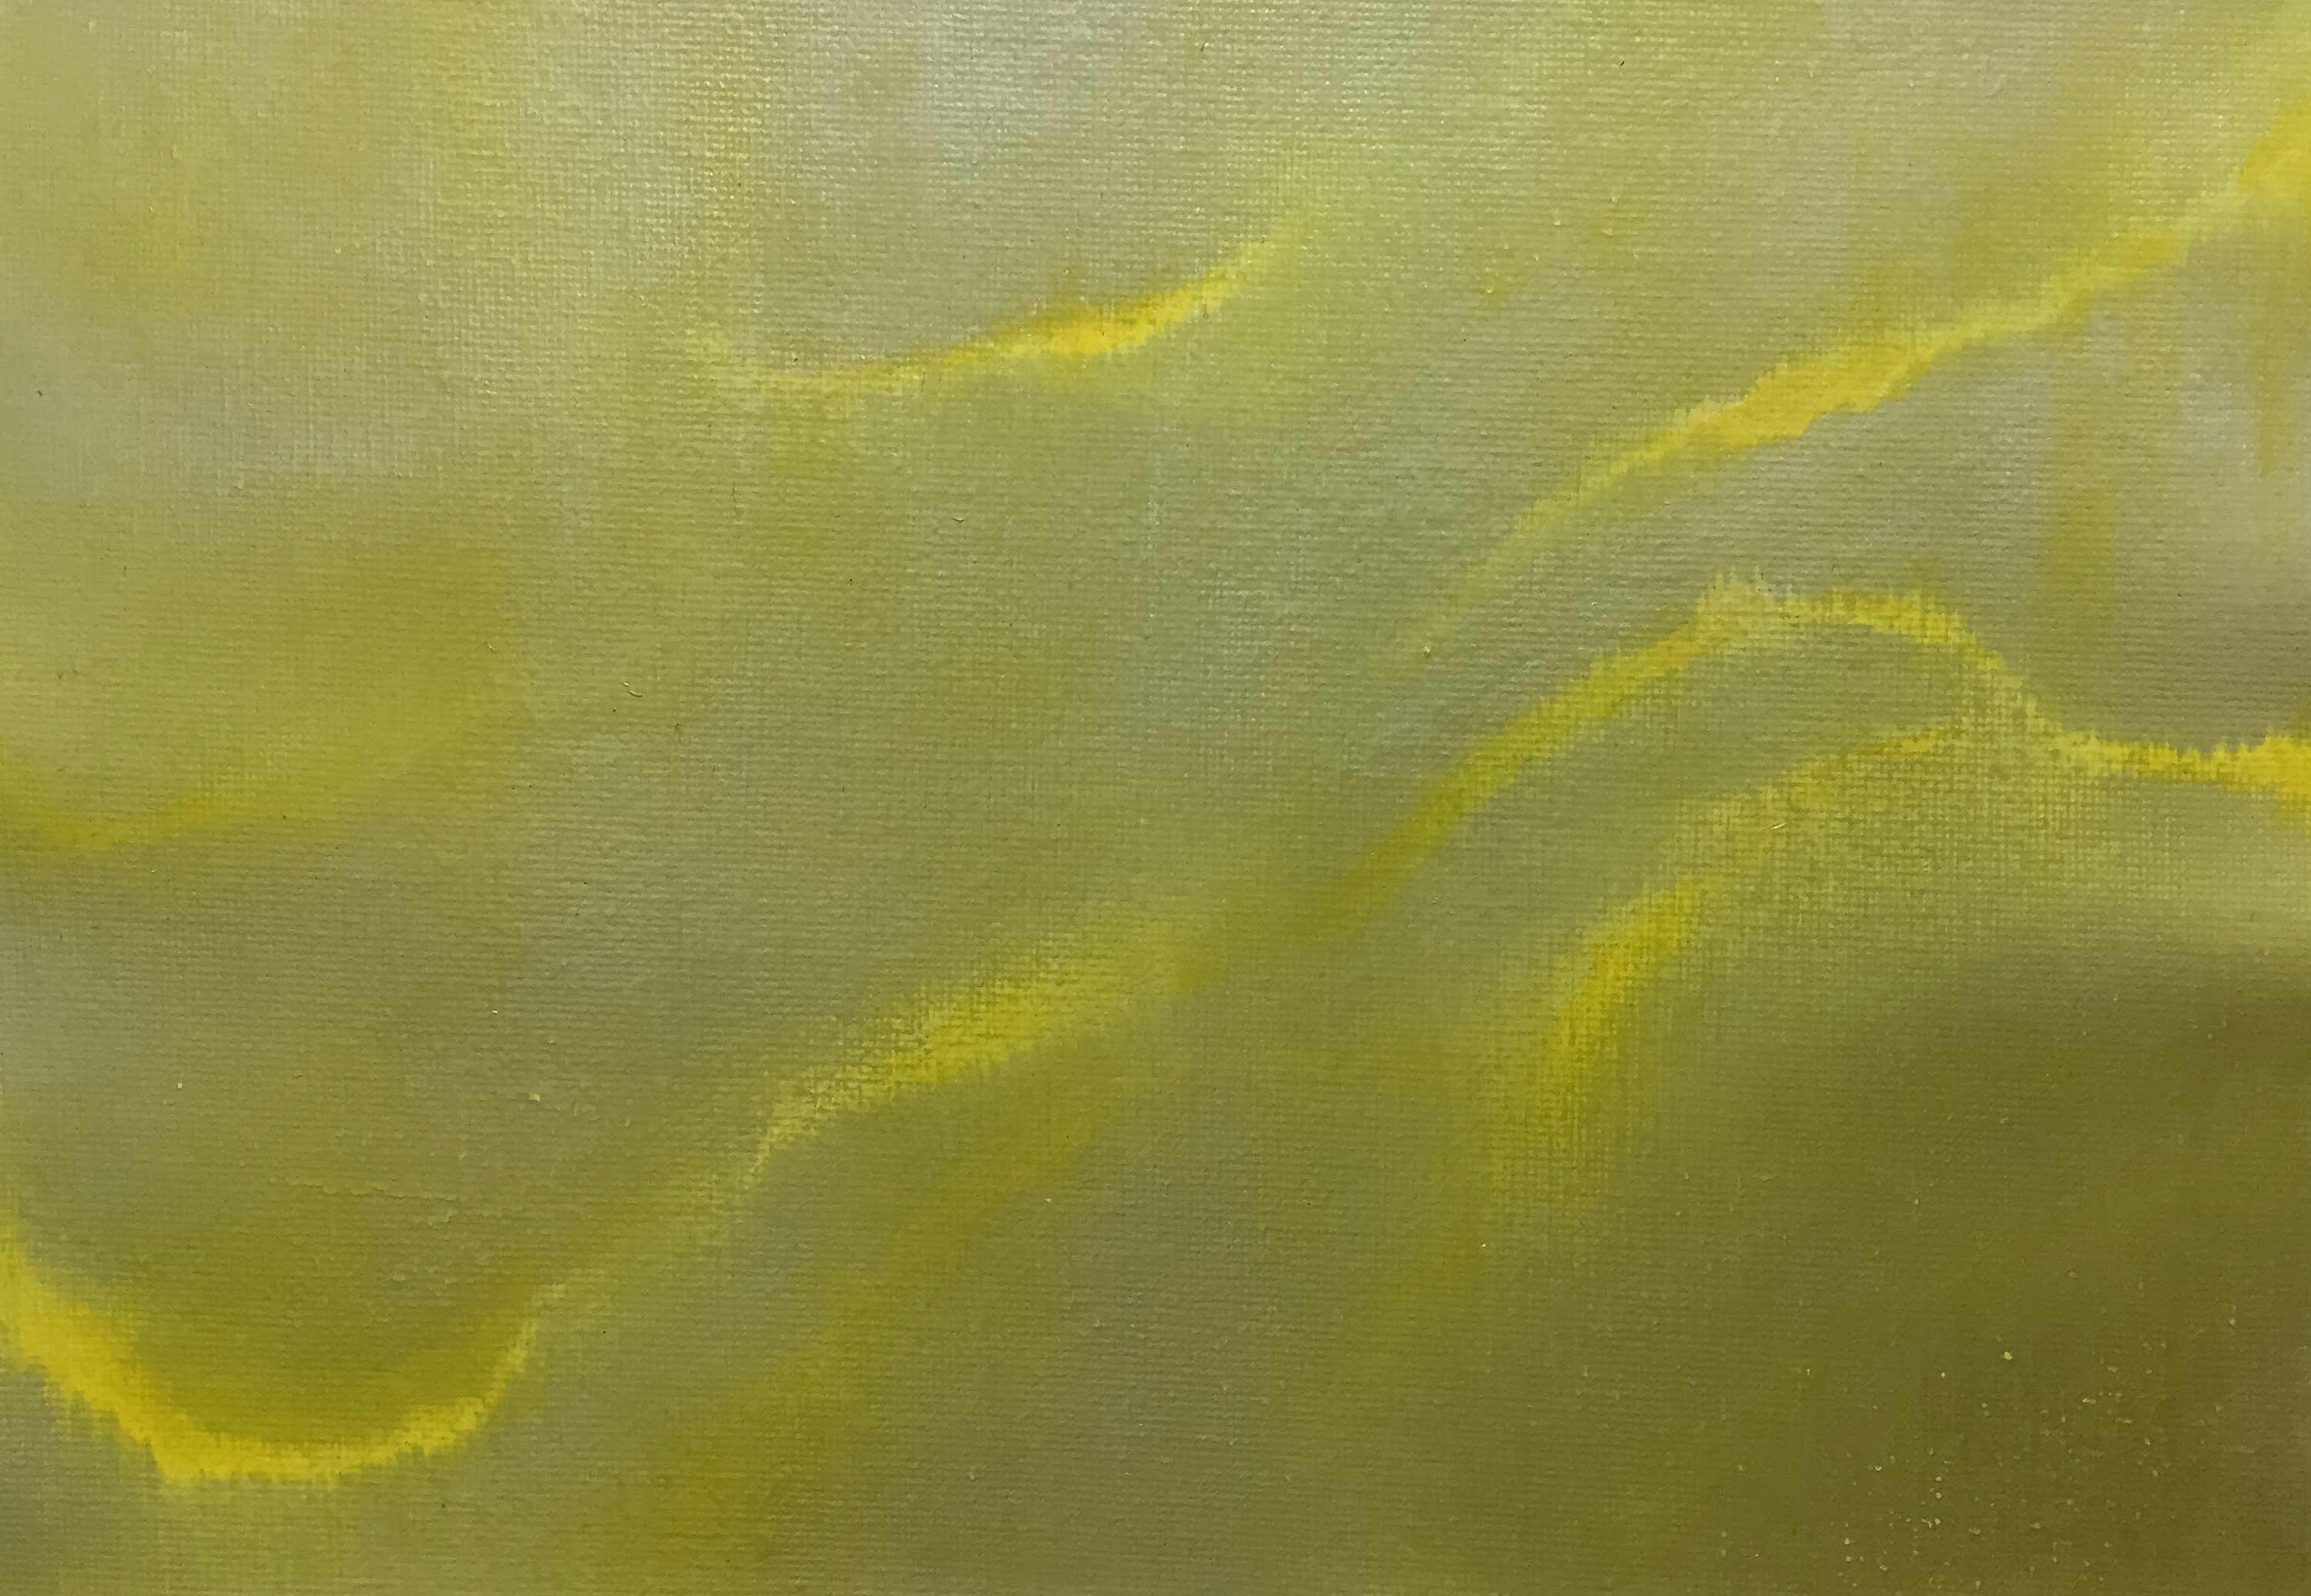 Pedro A. Figueredo. "Unfettered No. 4: Yellow" (2016). Acrylic on canvas sheet: approximately 7 x 10 in. on canvas sheet 9 x 12 in.